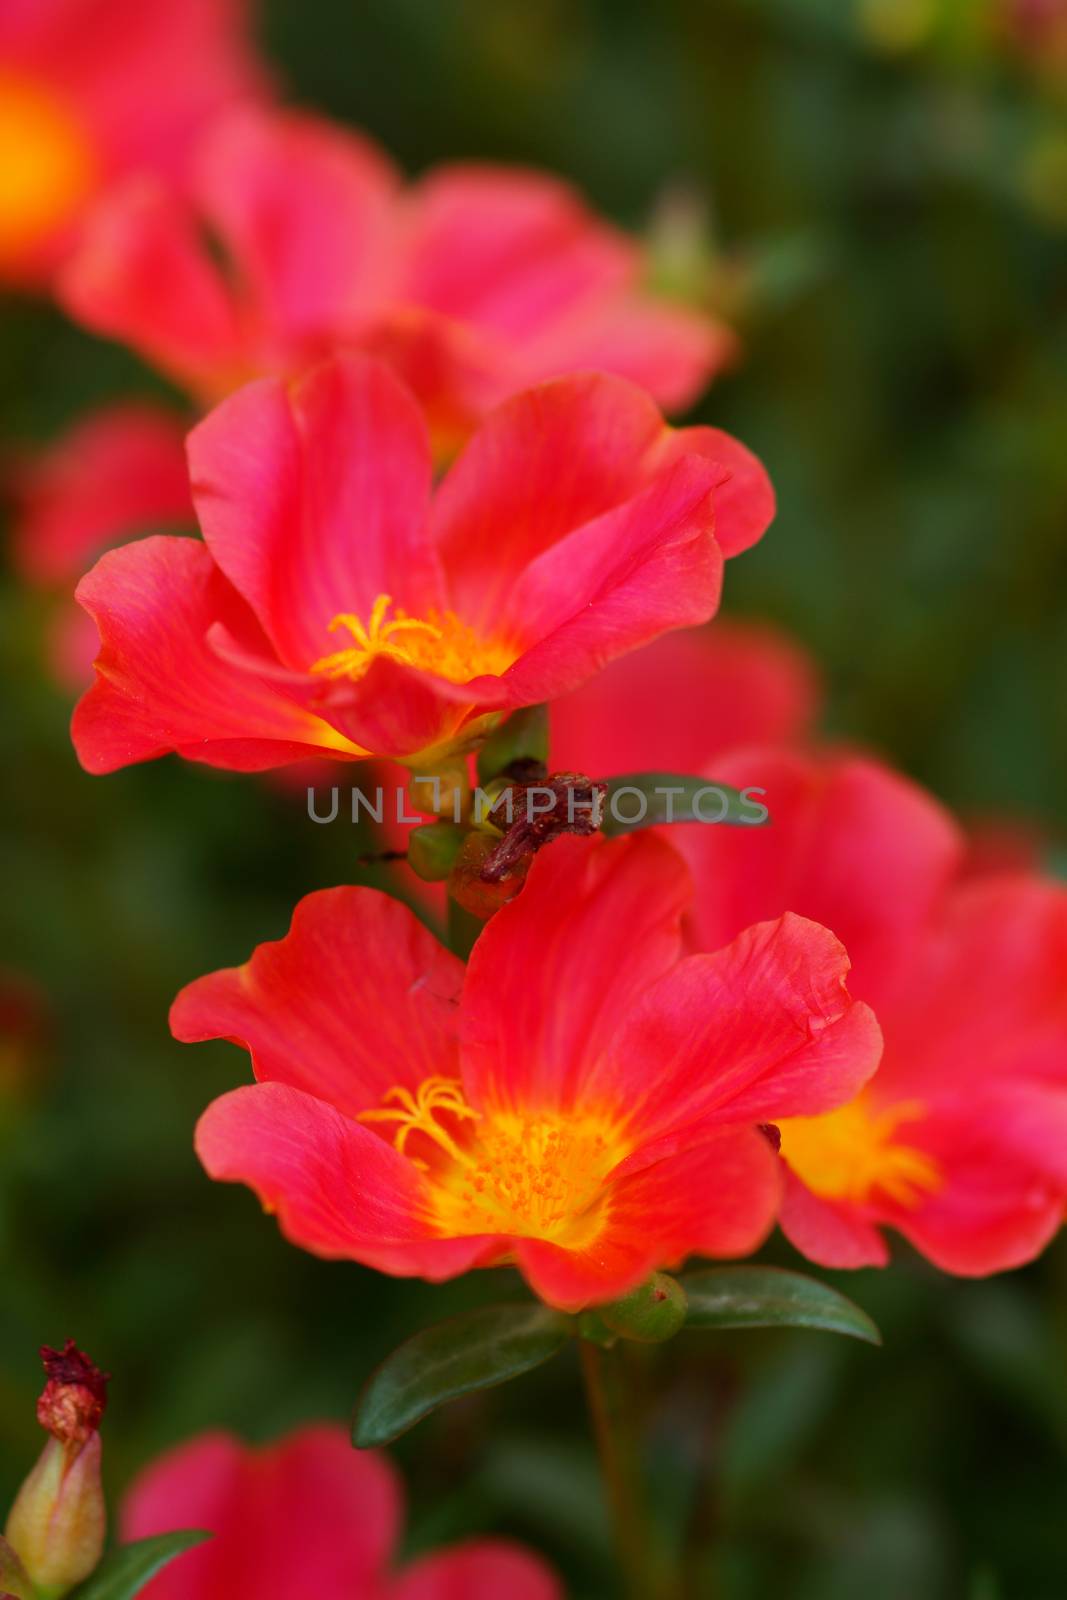 Red Portulaca flowers at the garden.